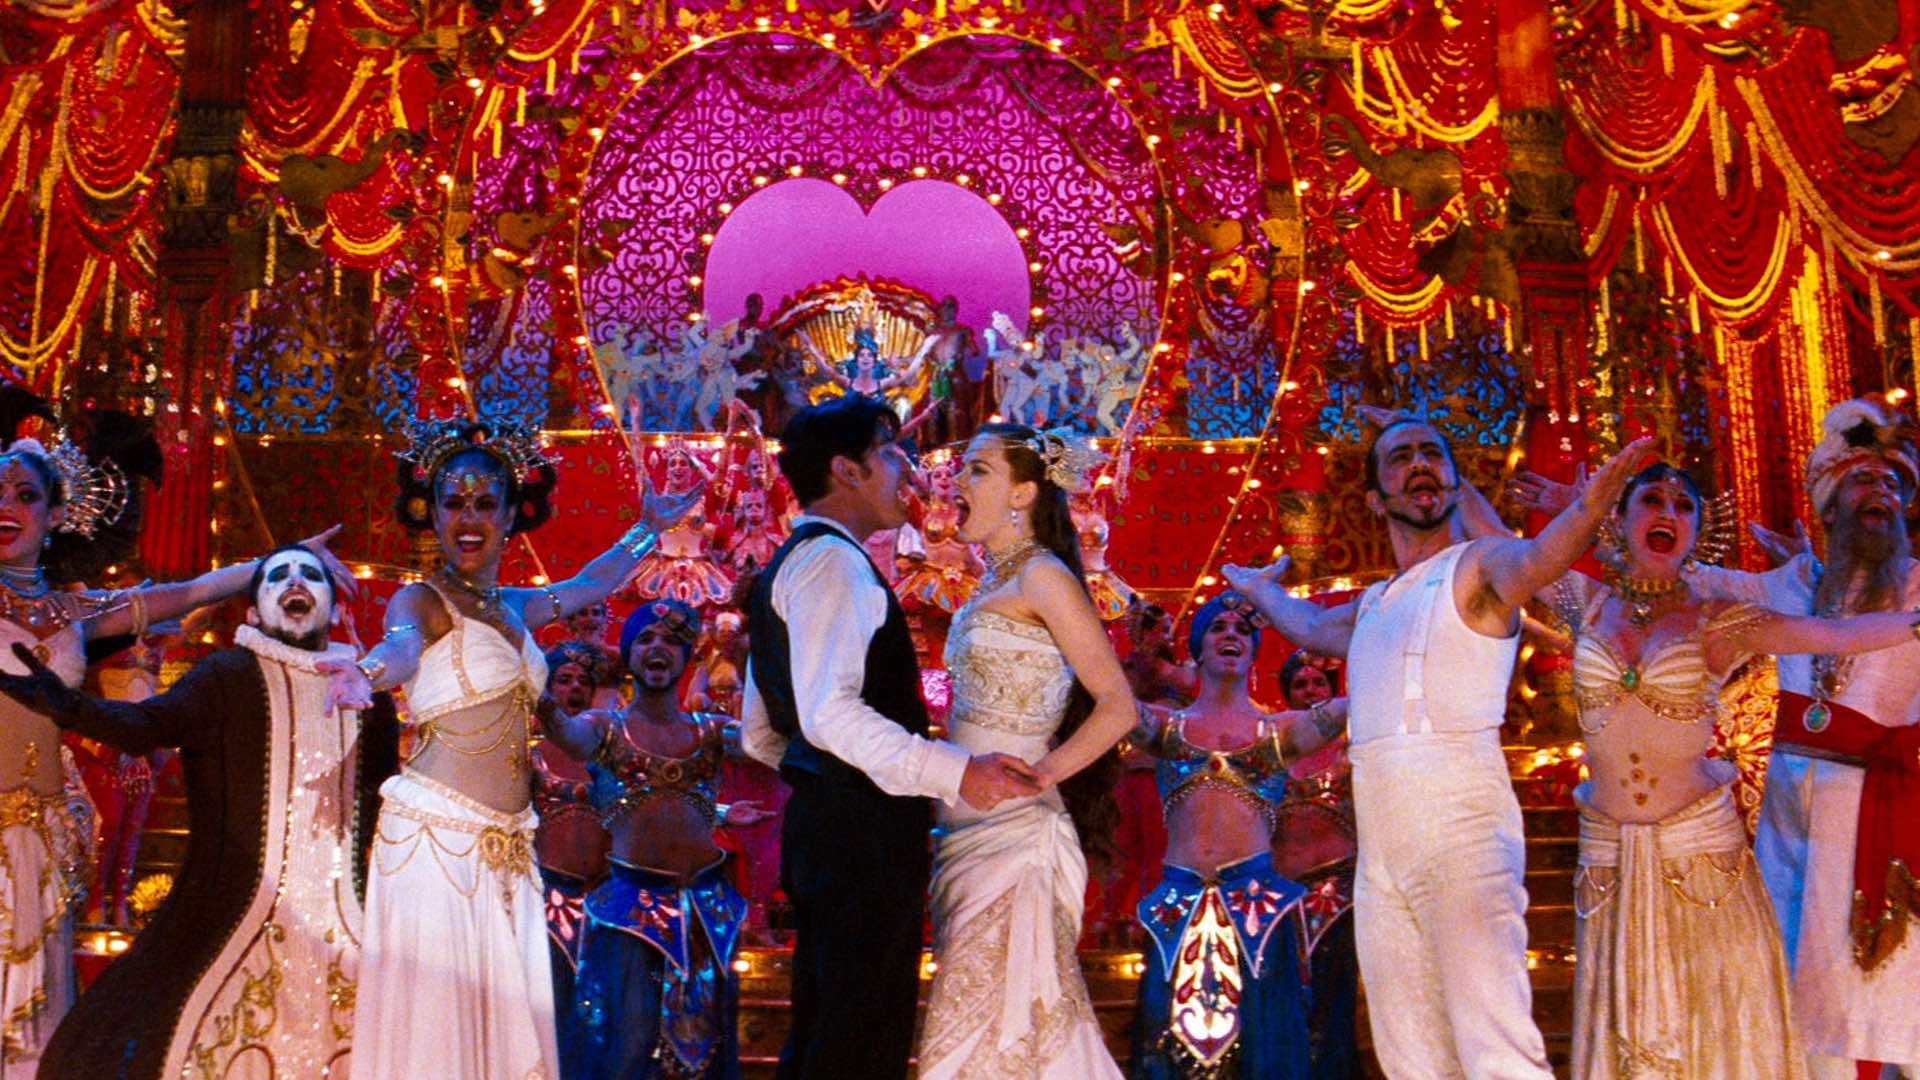 Beyond Cinema: Moulin Rouge — CANCELLED